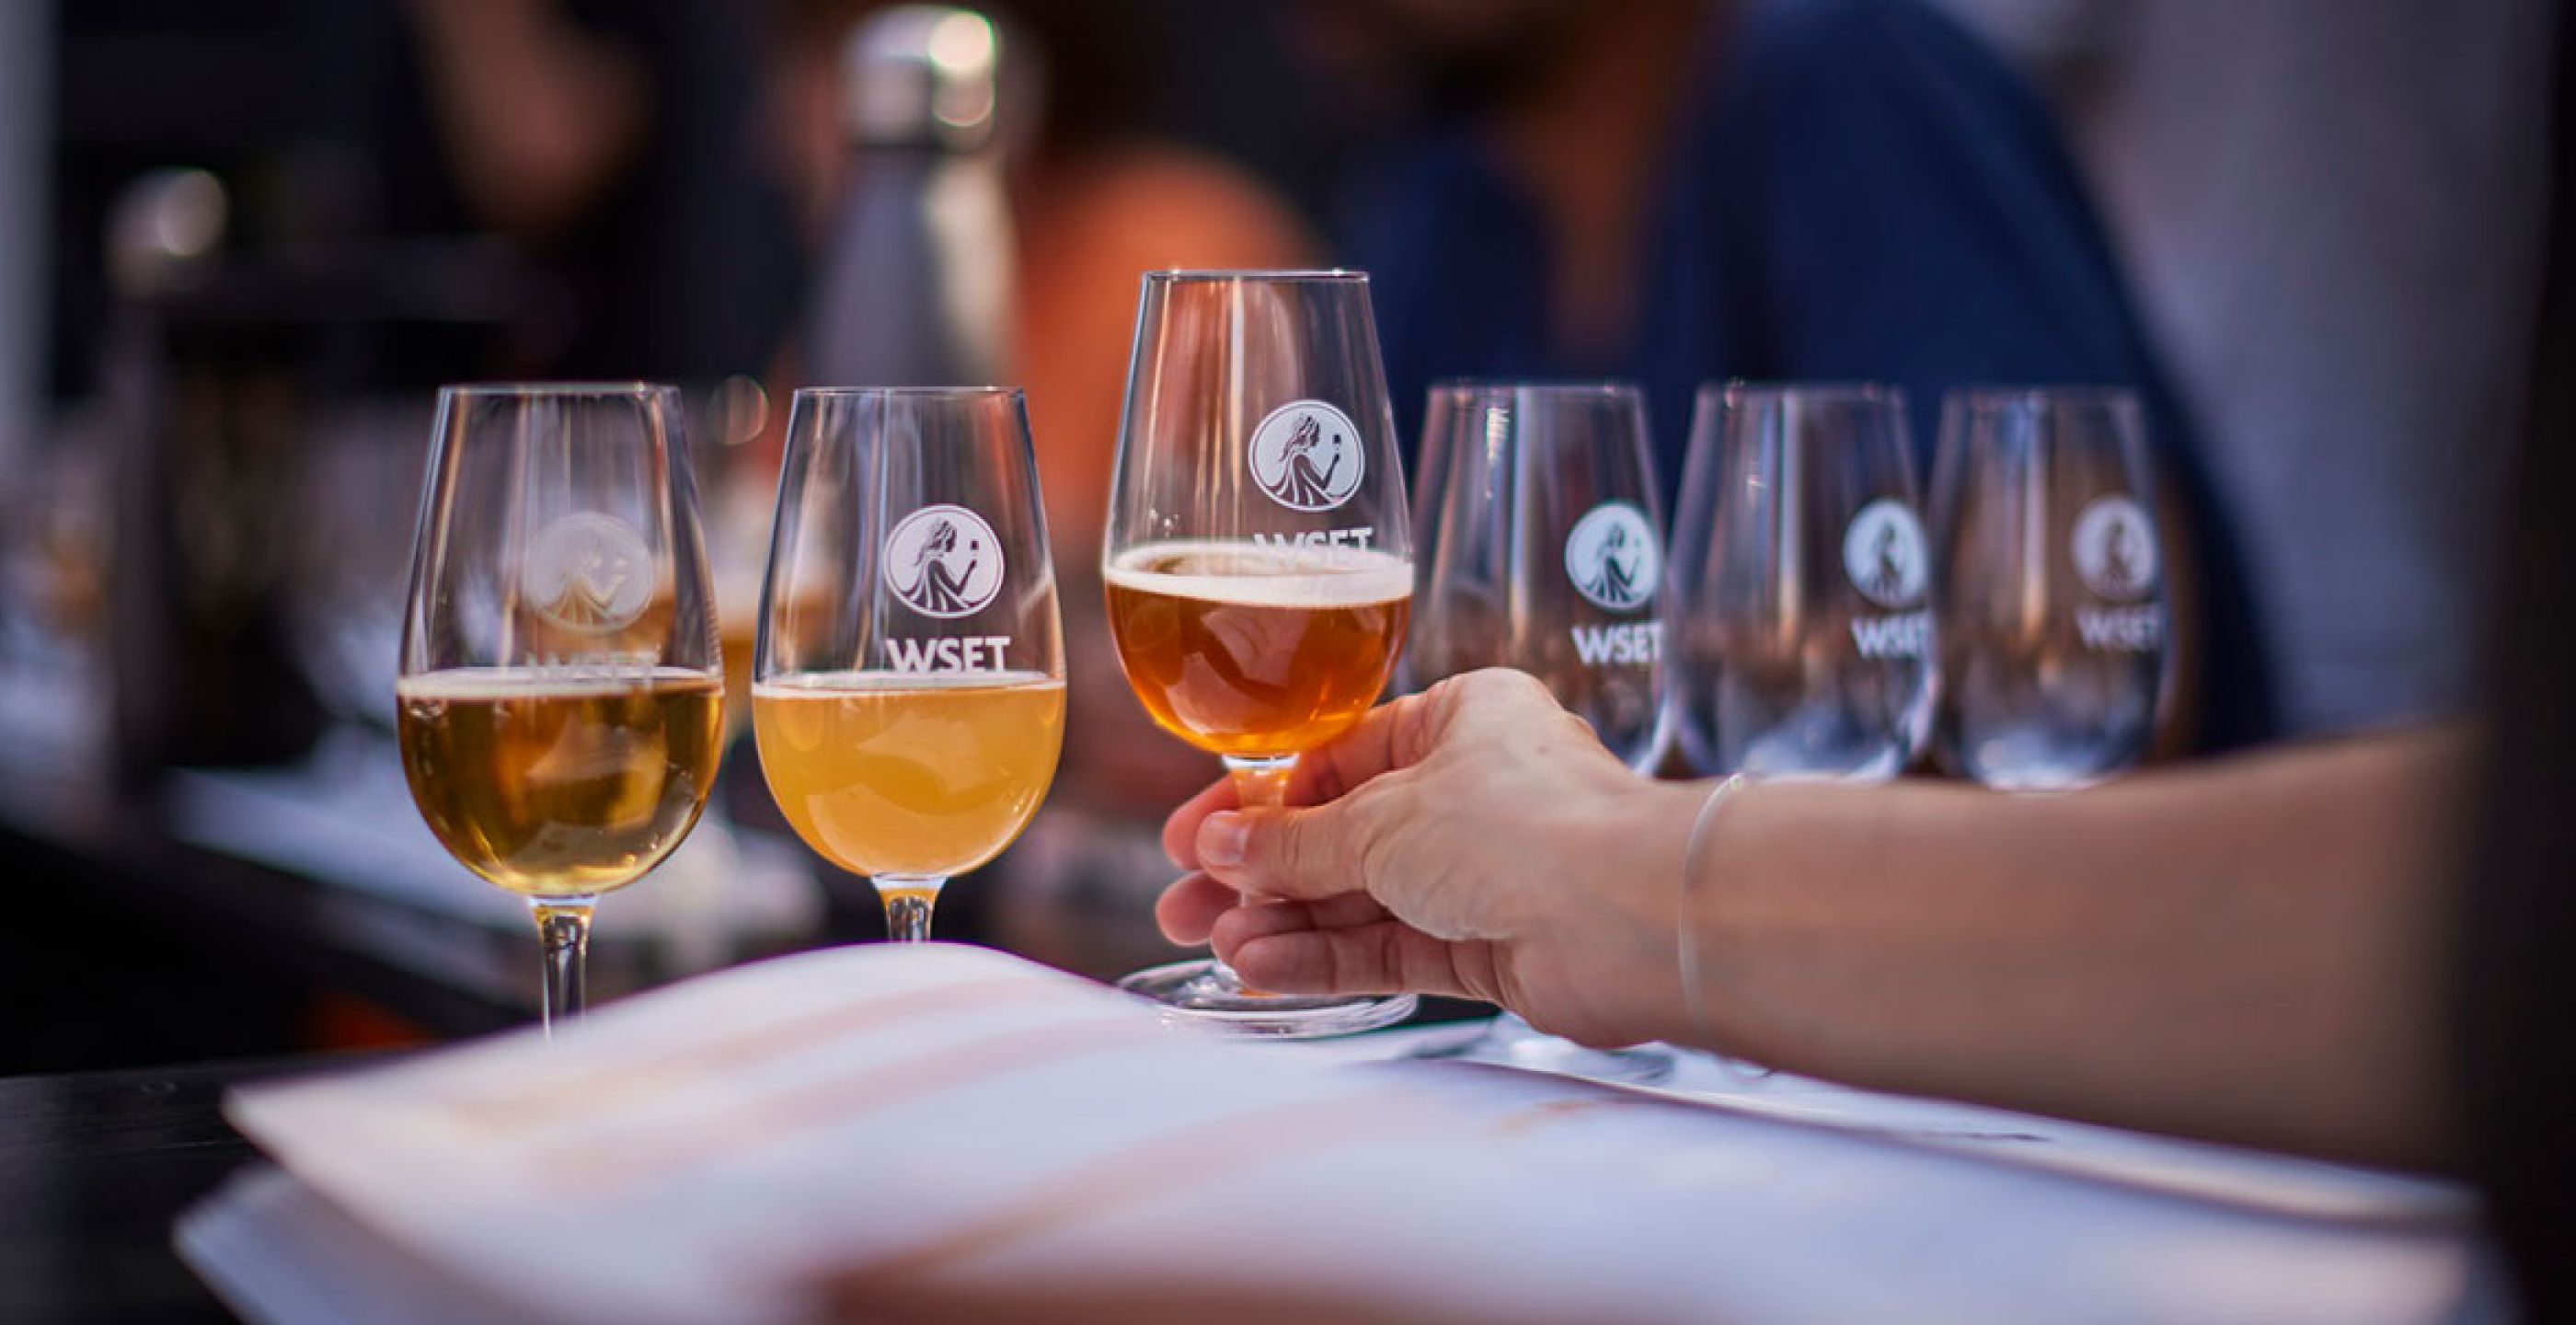 WSET Announces First Local Beer Course Providers